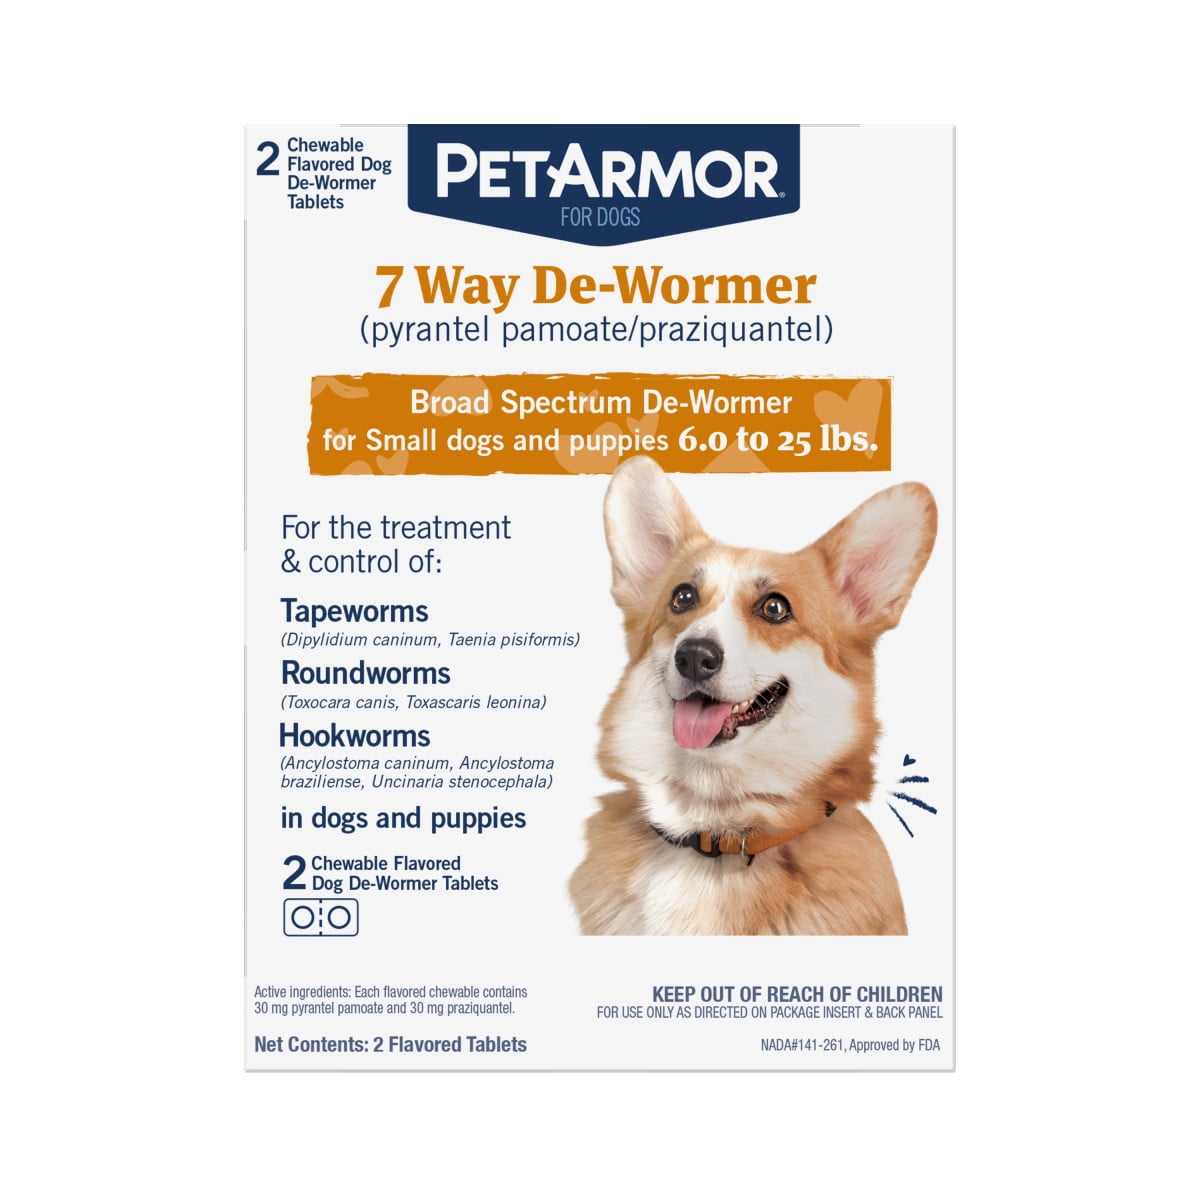 where can i buy dewormer for my dog